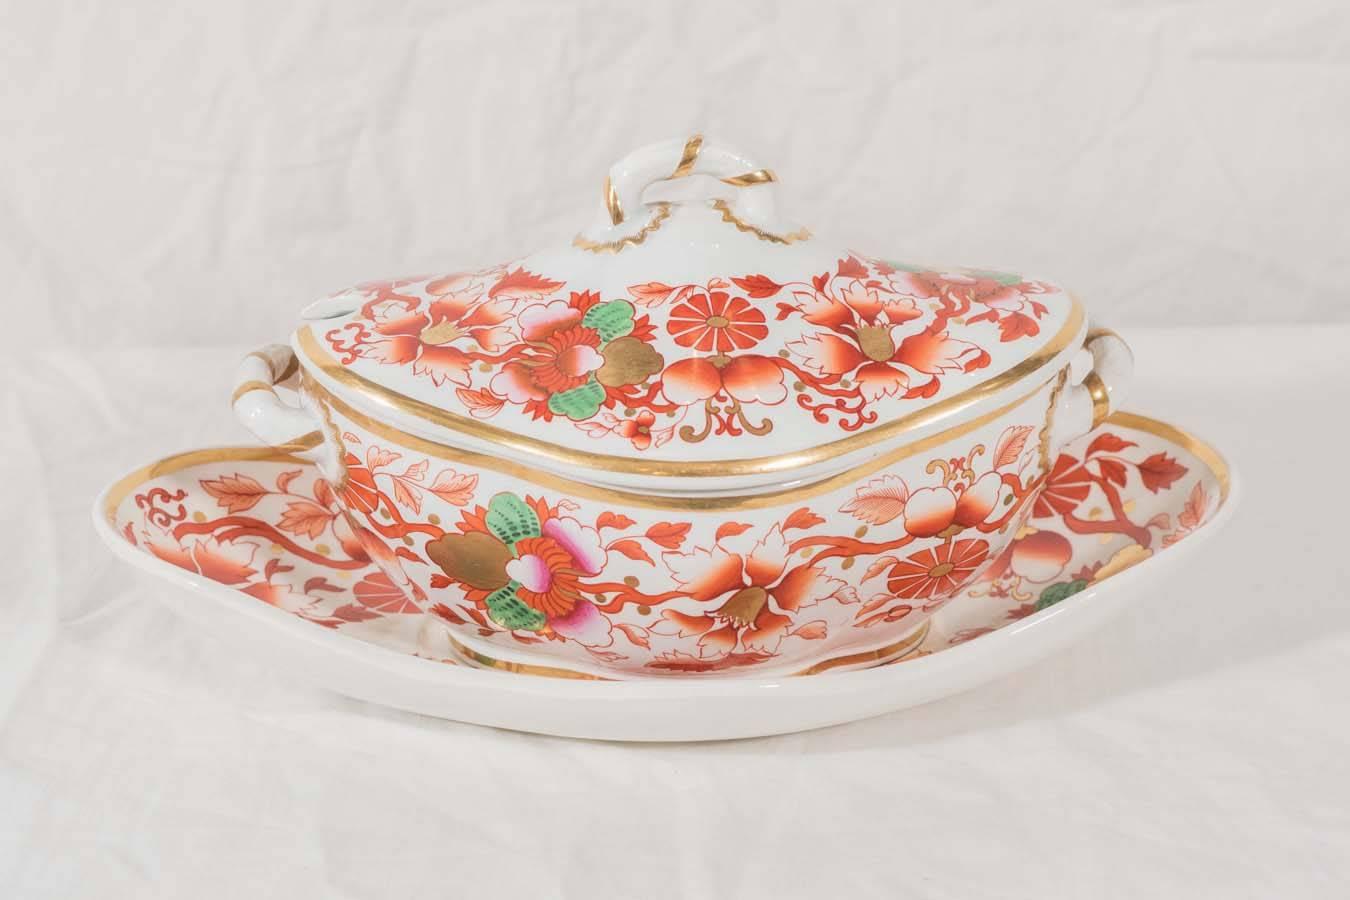 A pair of brilliantly colored sauce tureens and stands decorated with bright pink and orange flowers, green leaves and gilt. The exceptional gilding enhances the the rich colors of the flowers. The combination of colors is inspired by Japanese